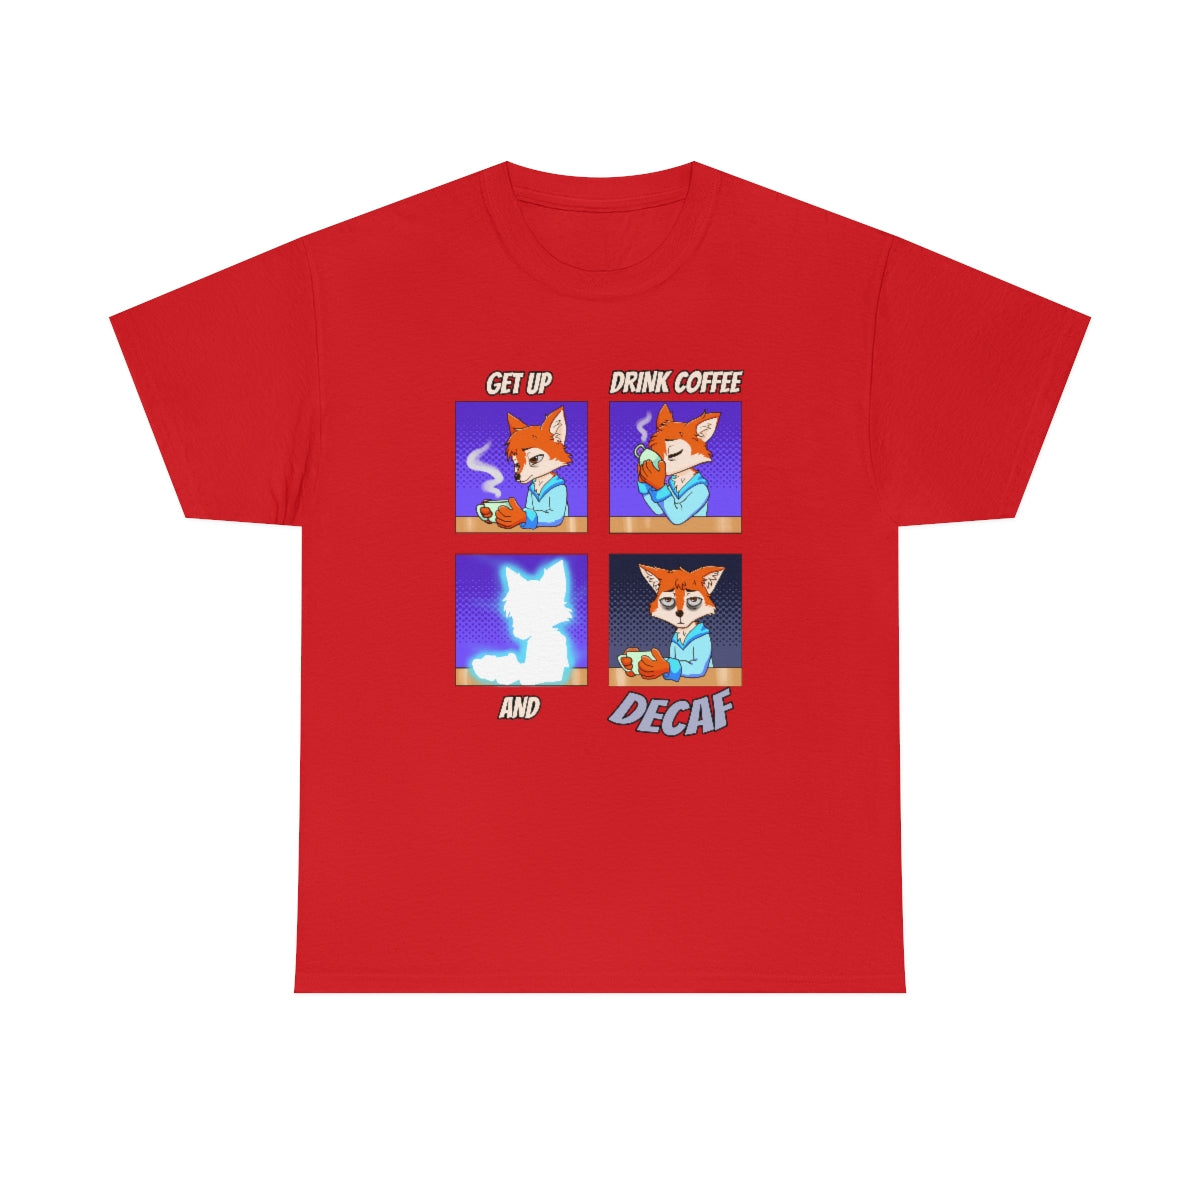 Decaf - T-Shirt T-Shirt Artworktee Red S 